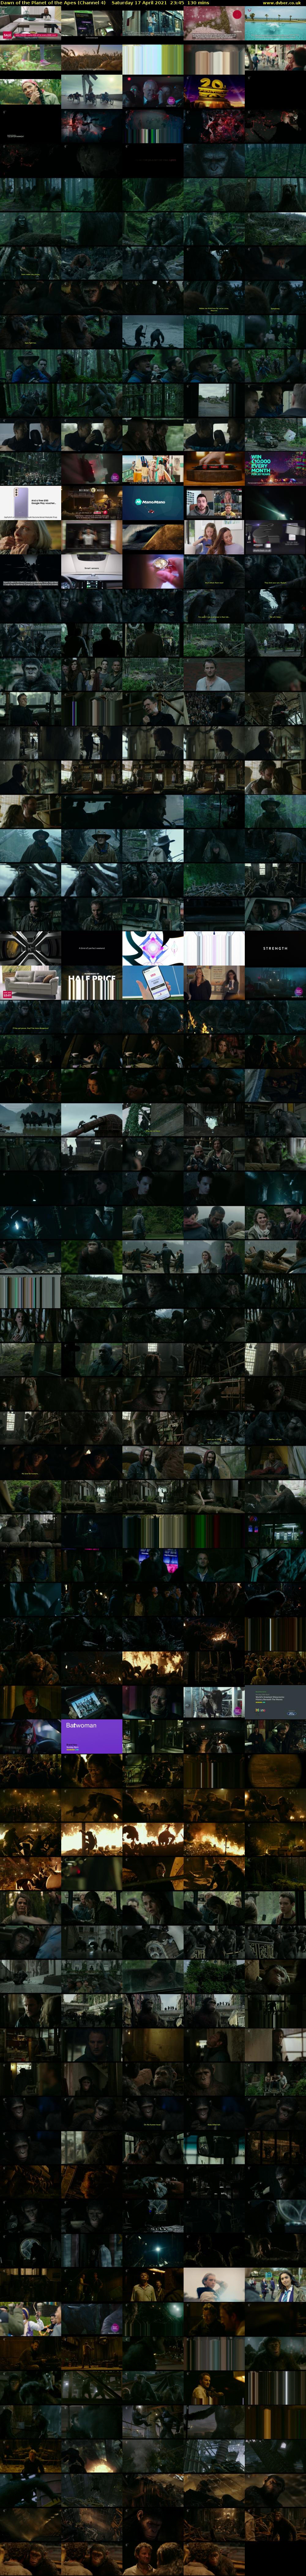 Dawn of the Planet of the Apes (Channel 4) Saturday 17 April 2021 23:45 - 01:55